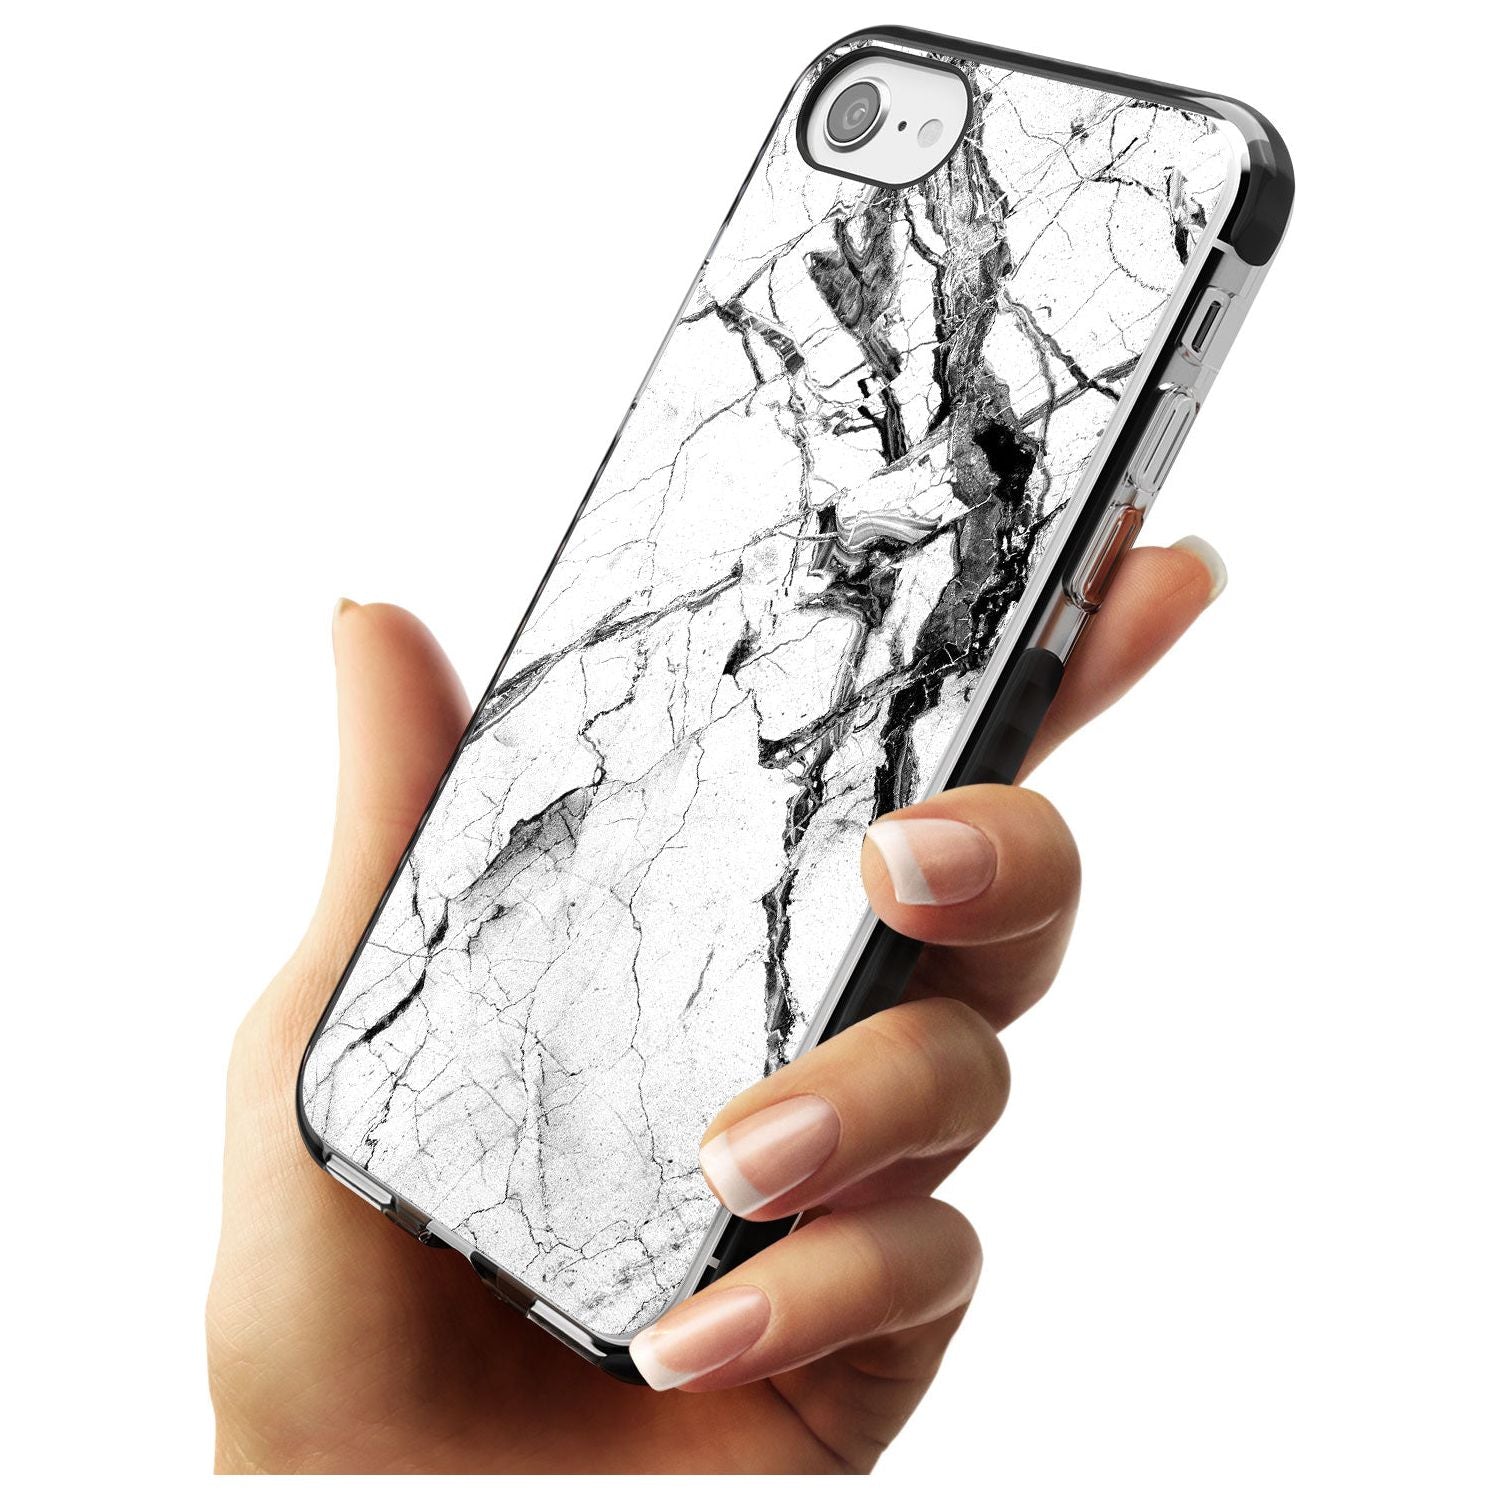 Black & White Stormy Marble Black Impact Phone Case for iPhone SE 8 7 Plus